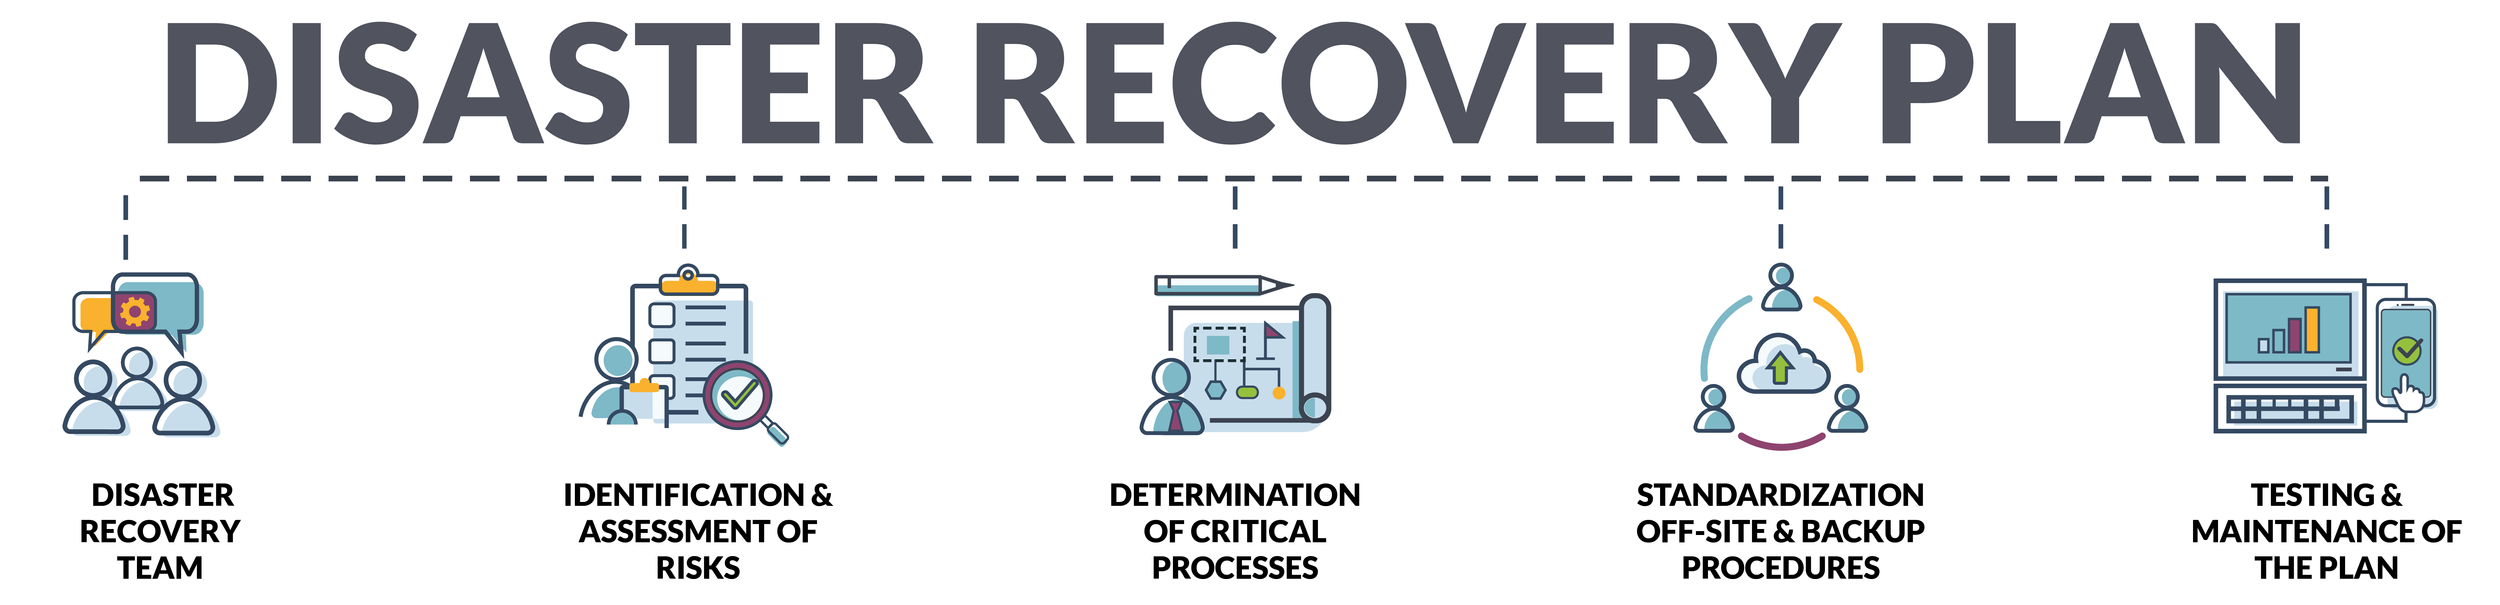 Disaster recovery plan process timeline